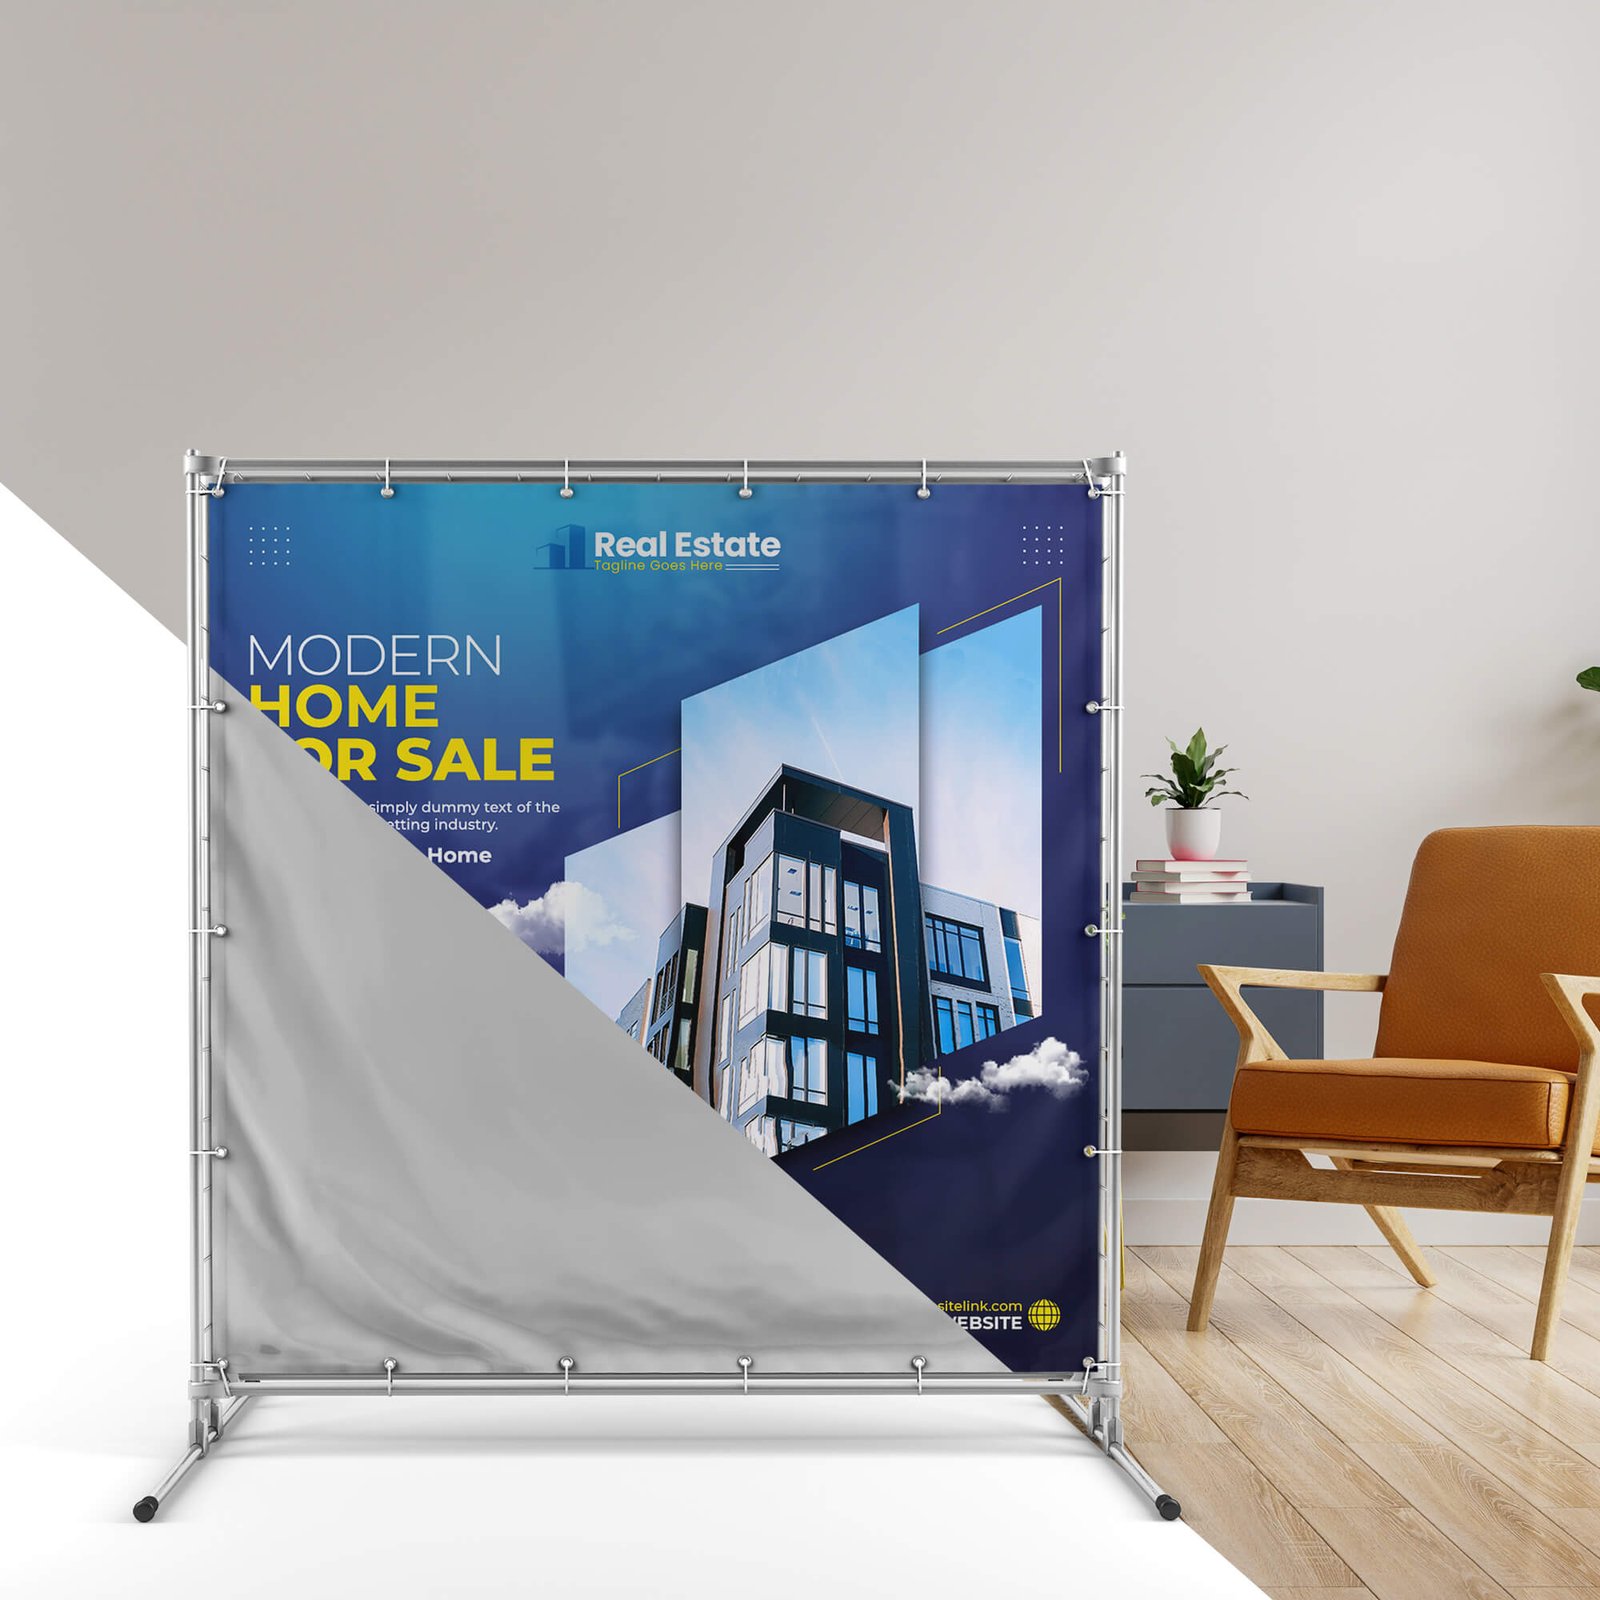 Editable Free Square Banner Mockup PSD Template (1)